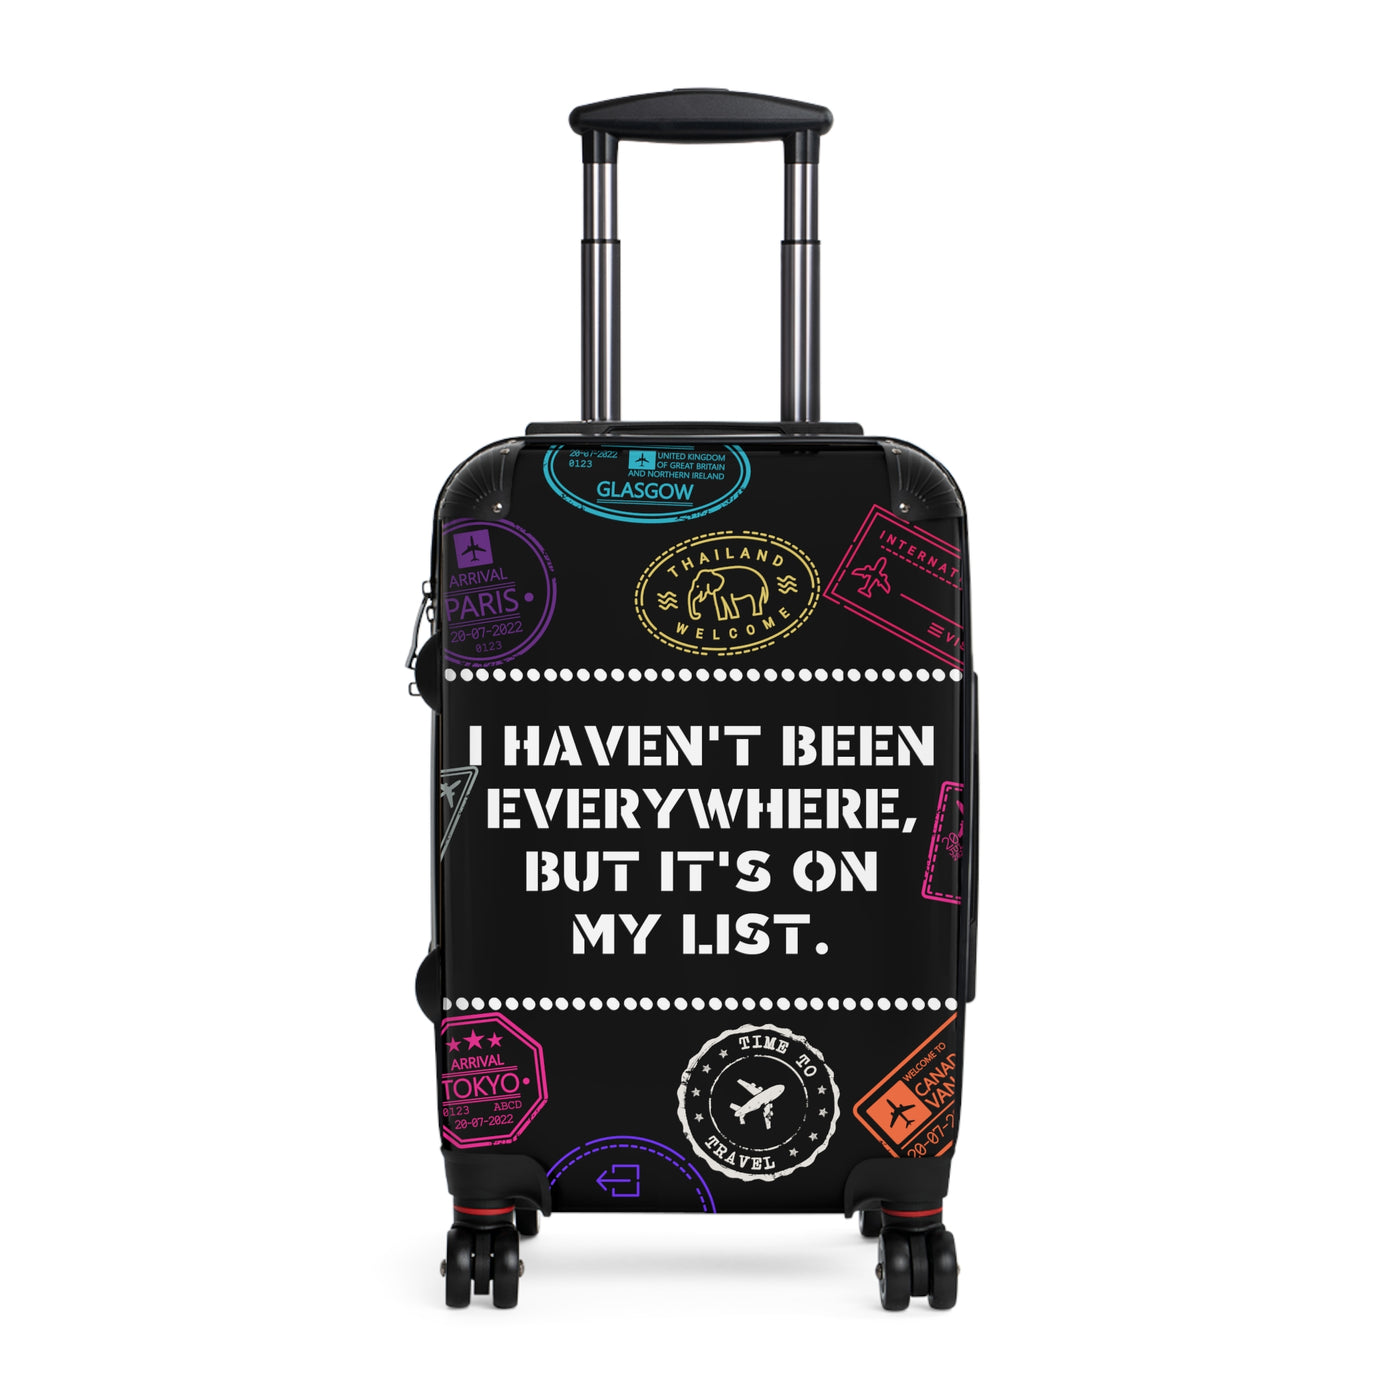 IT'S ON MY LIST Thin Suitcase - 3 sizes